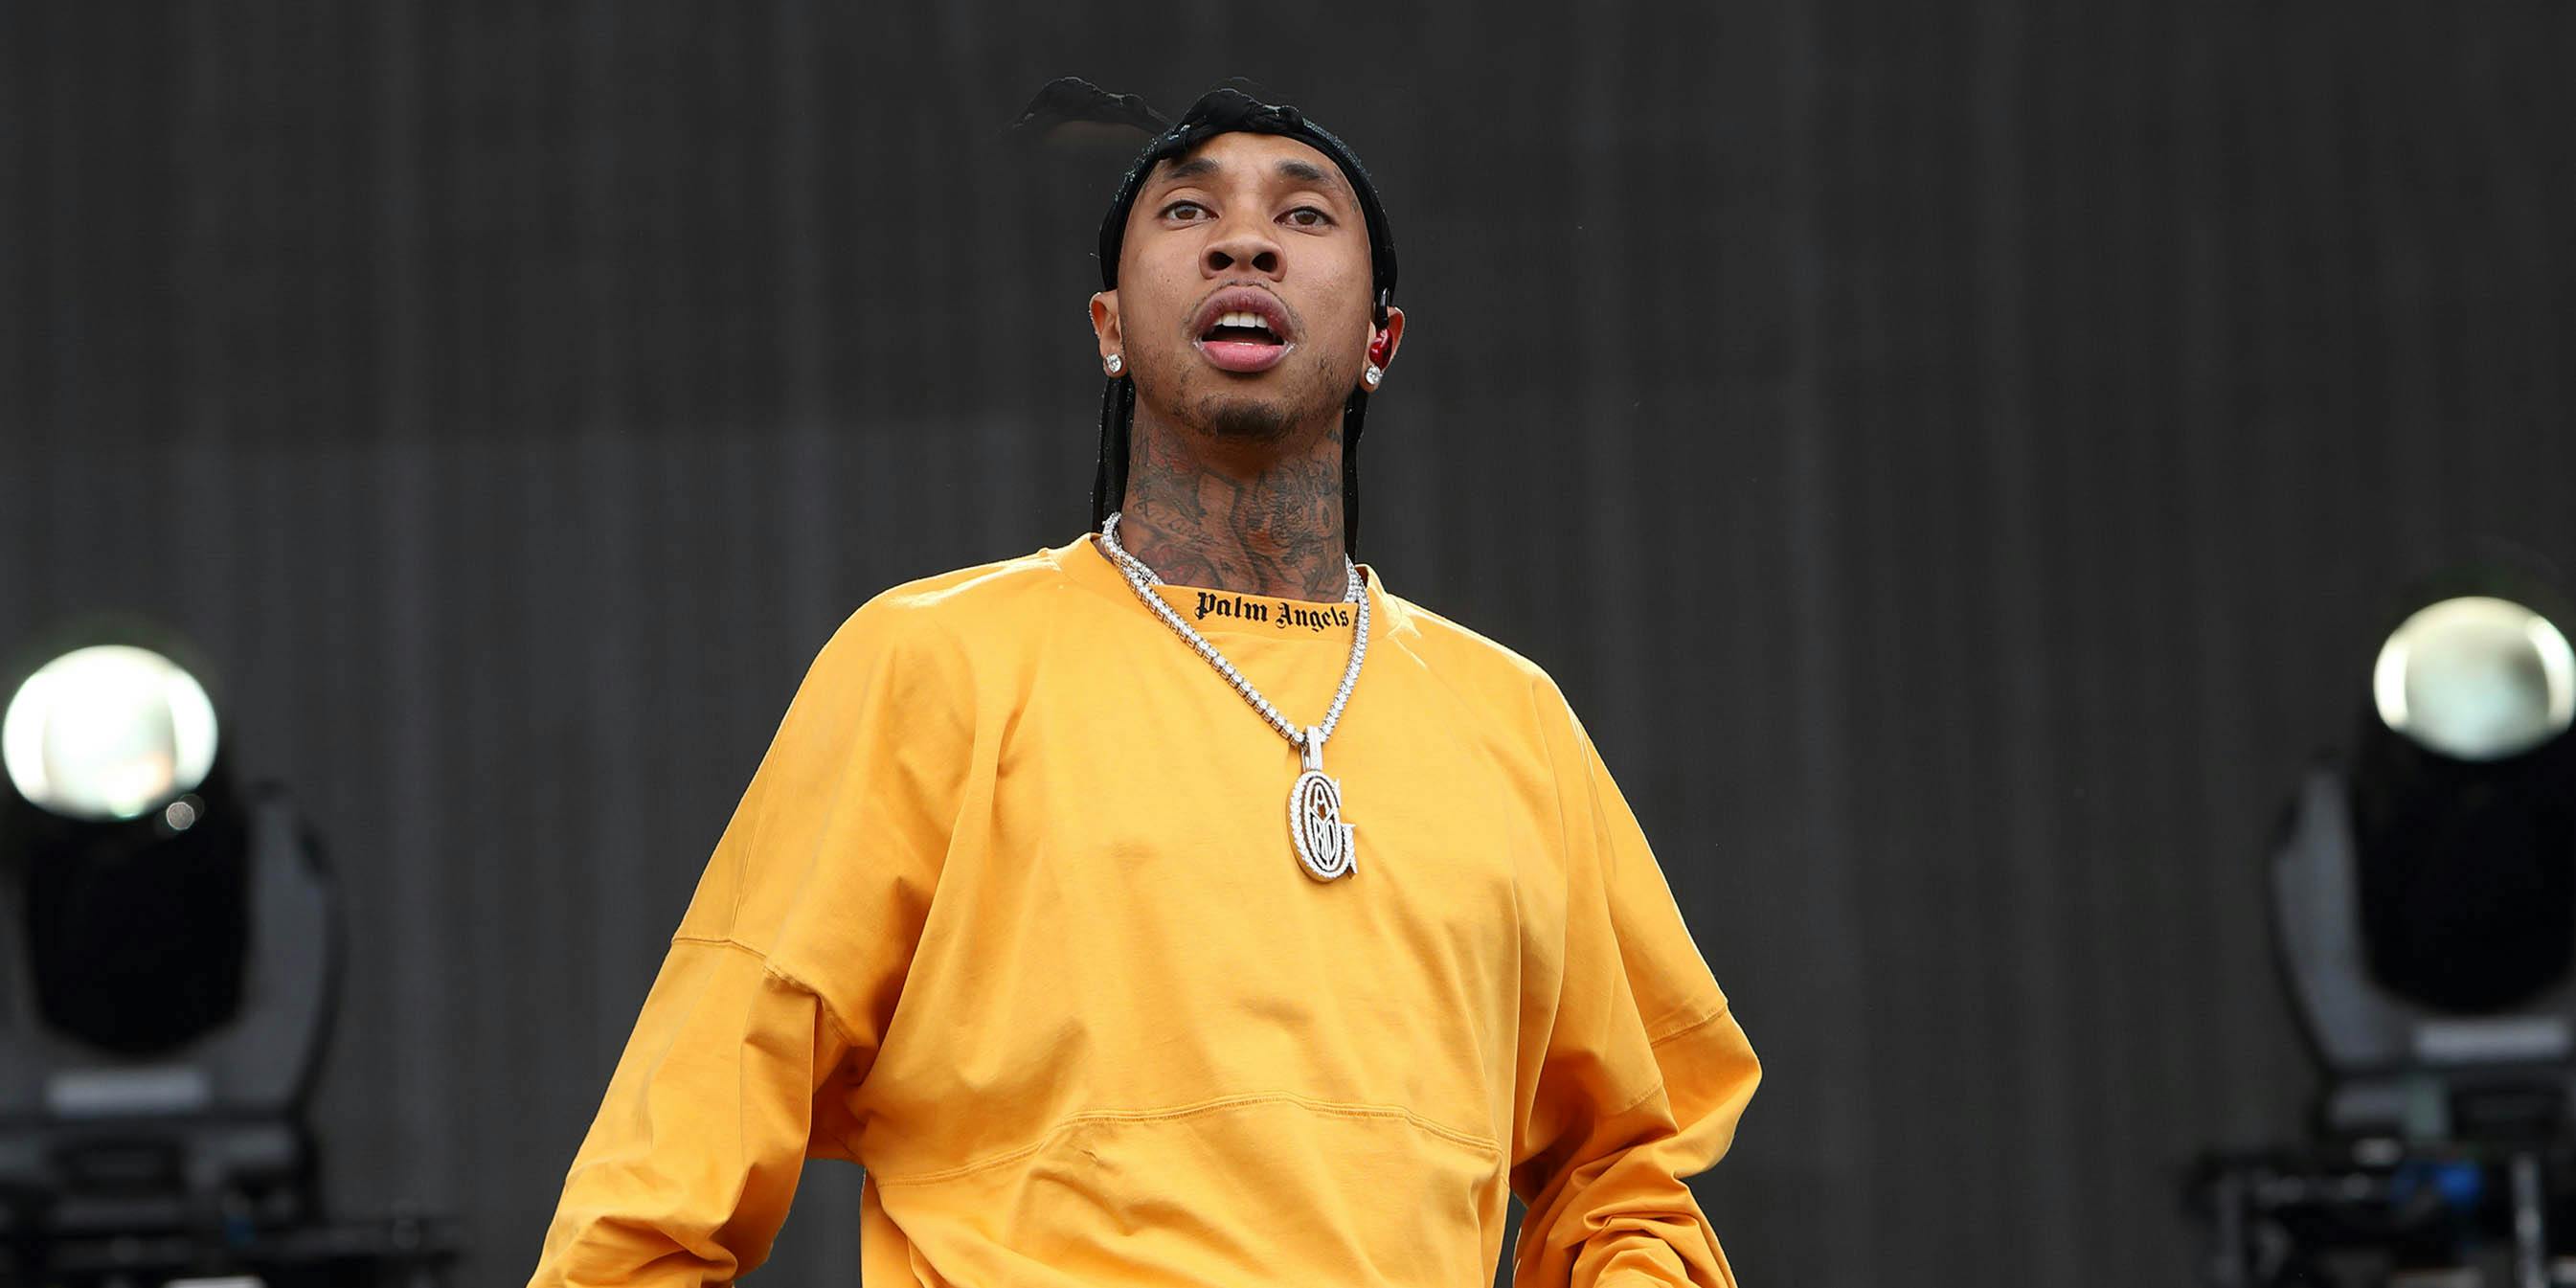 LONDON, ENGLAND - JULY 09: Tyga performs on day 3 of Wireless Festival at Finsbury Park on July 9, 2017 in London, England. (Photo by Burak Cingi/Redferns via Getty Images)